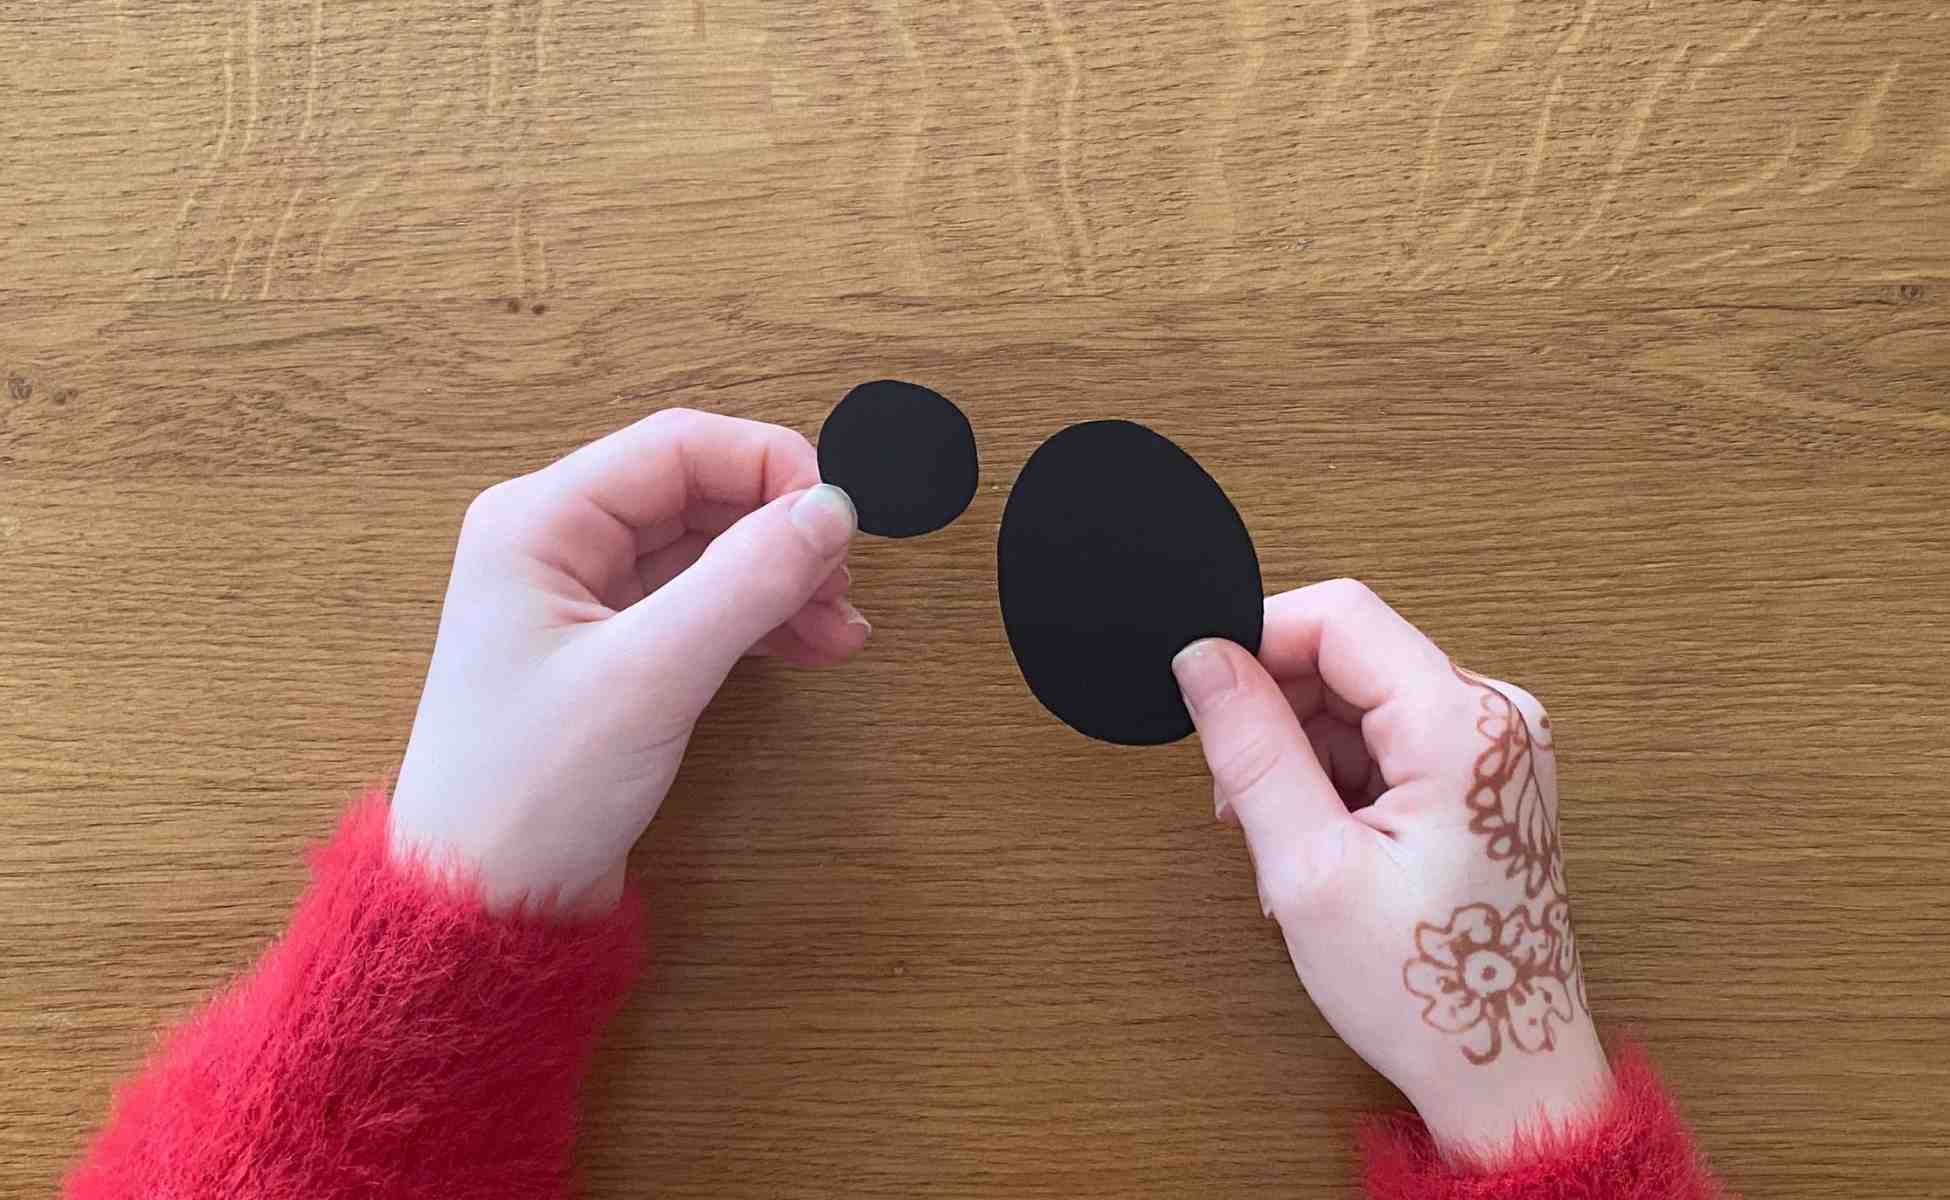 Step 1 Cut out a small circle and a larger oval from black paper - Make a spider - Winston's Wish